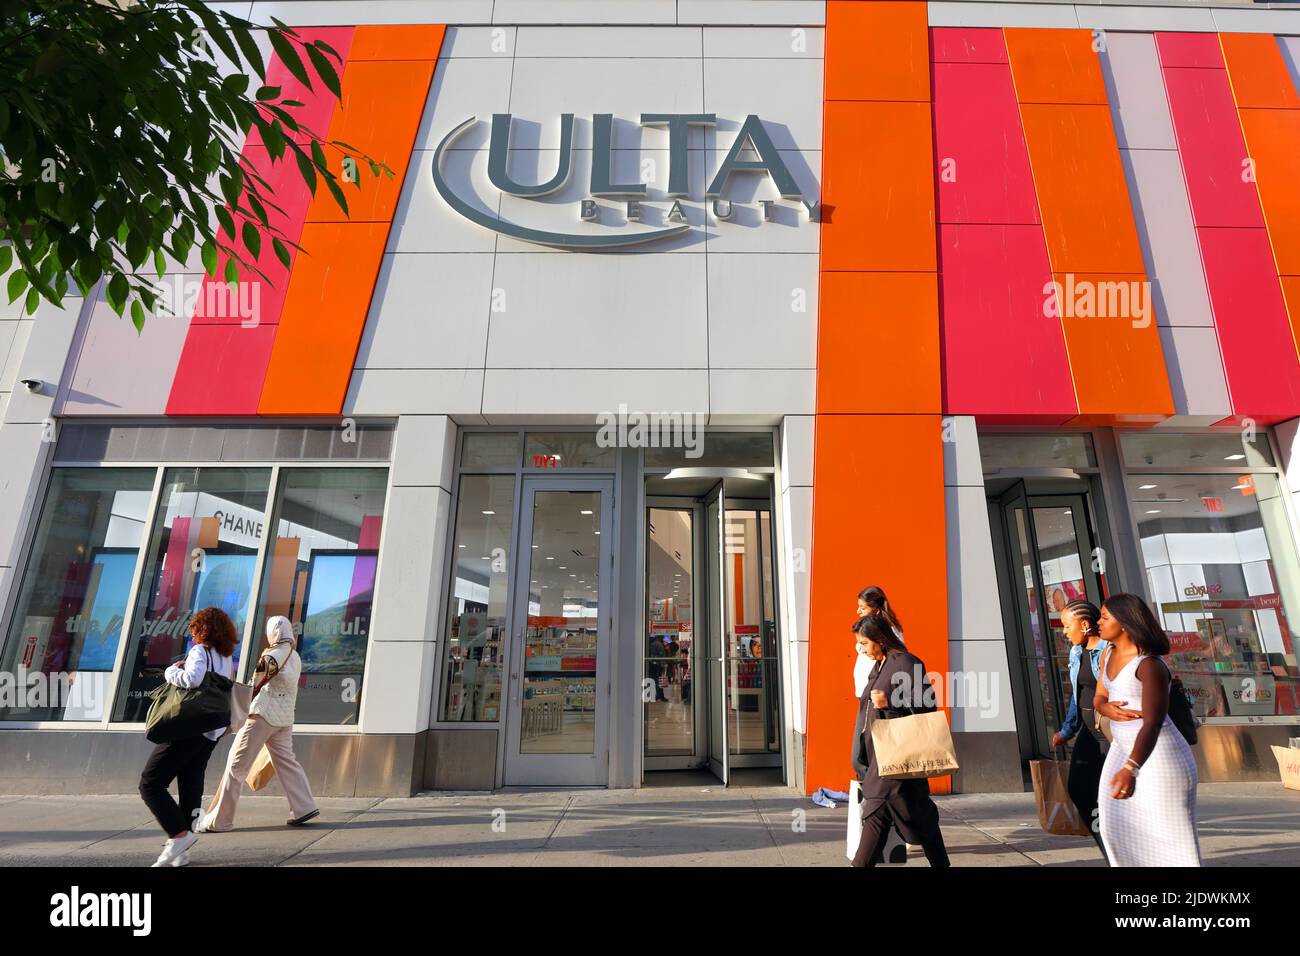 Ulta Beauty, 51 W 34th St., New York, NY. exterior storefront of a cosmetics store in Herald Square in Manhattan. Stock Photo